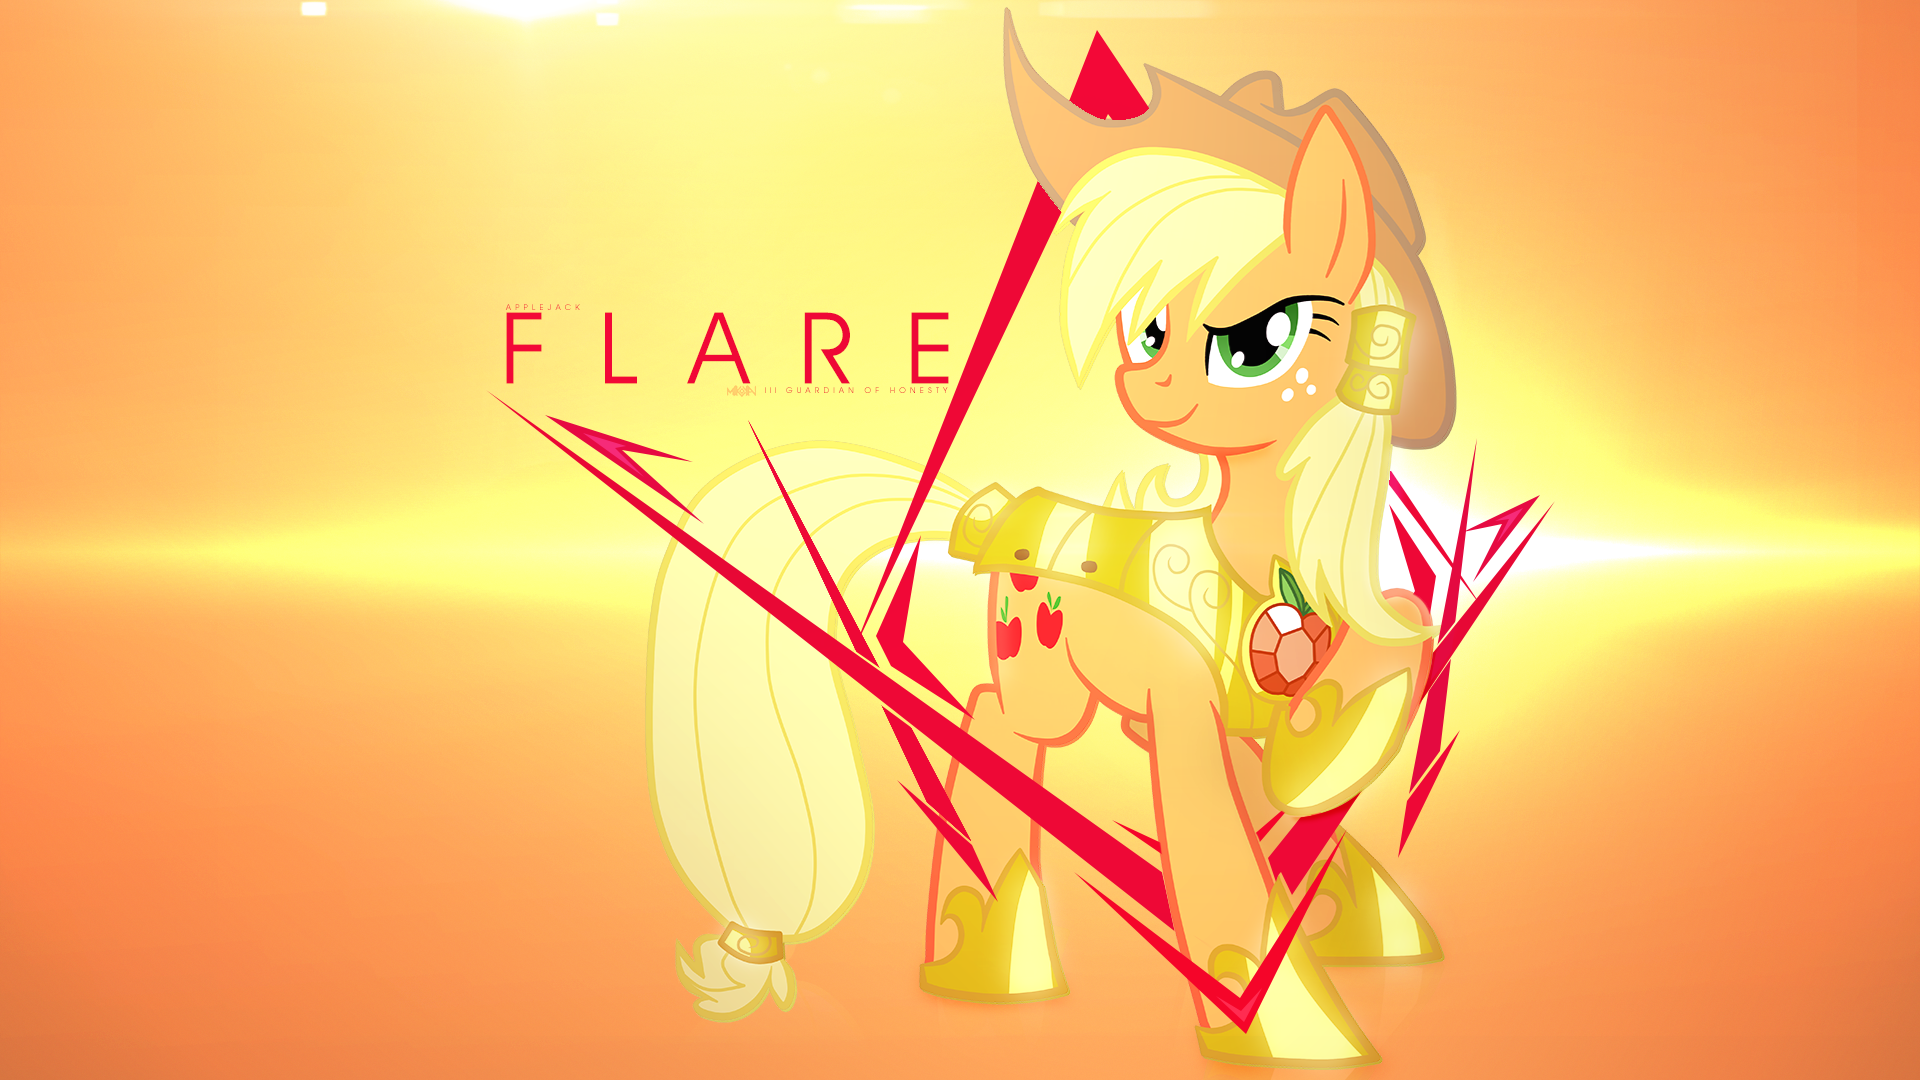 Flare by MikoyaNx